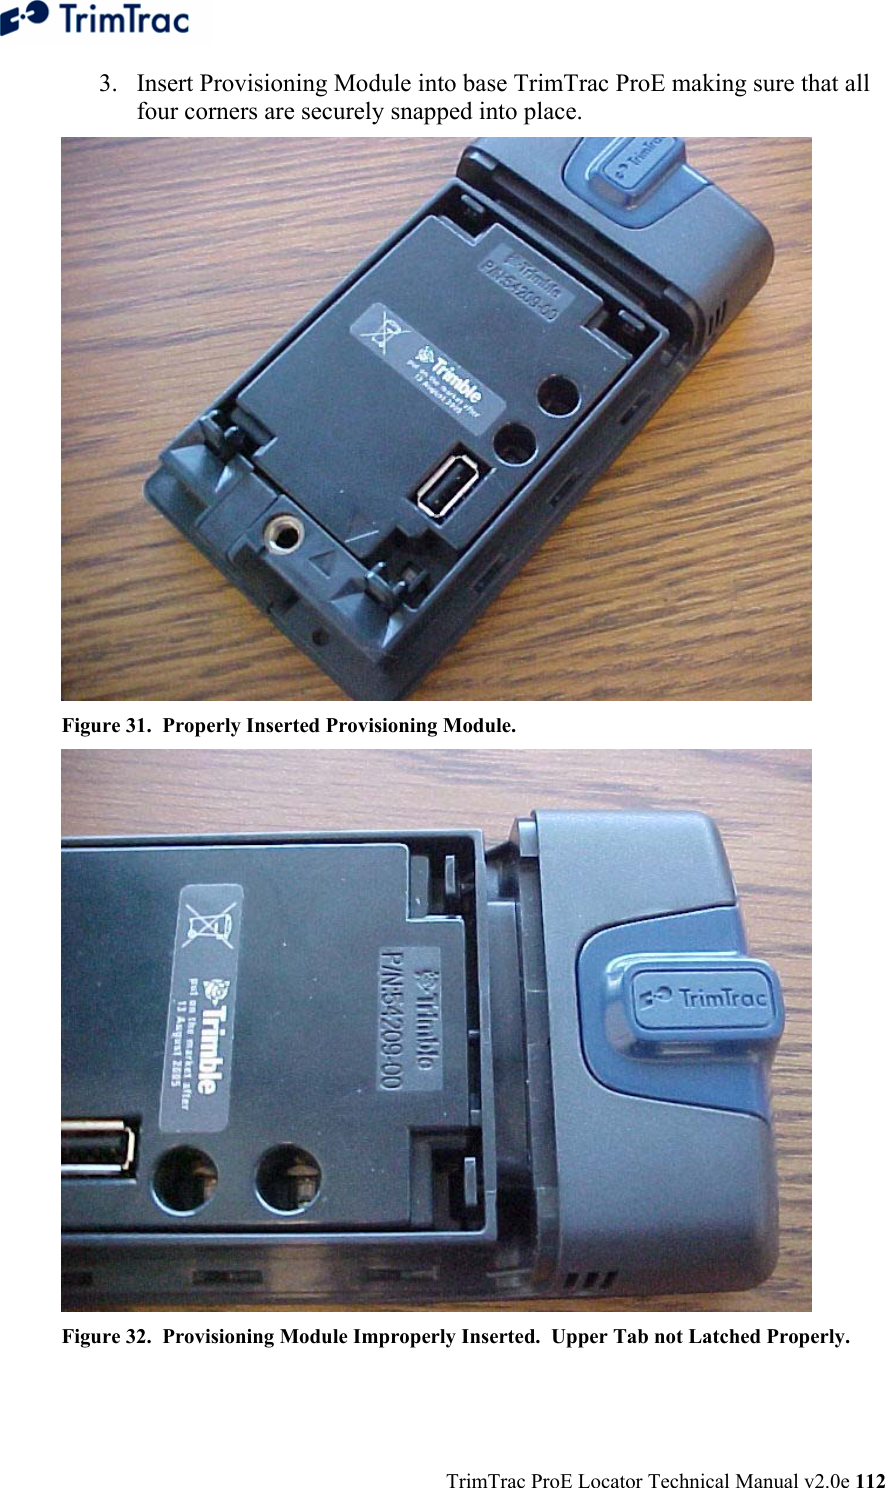  TrimTrac ProE Locator Technical Manual v2.0e 112 3. Insert Provisioning Module into base TrimTrac ProE making sure that all four corners are securely snapped into place.  Figure 31.  Properly Inserted Provisioning Module.  Figure 32.  Provisioning Module Improperly Inserted.  Upper Tab not Latched Properly. 